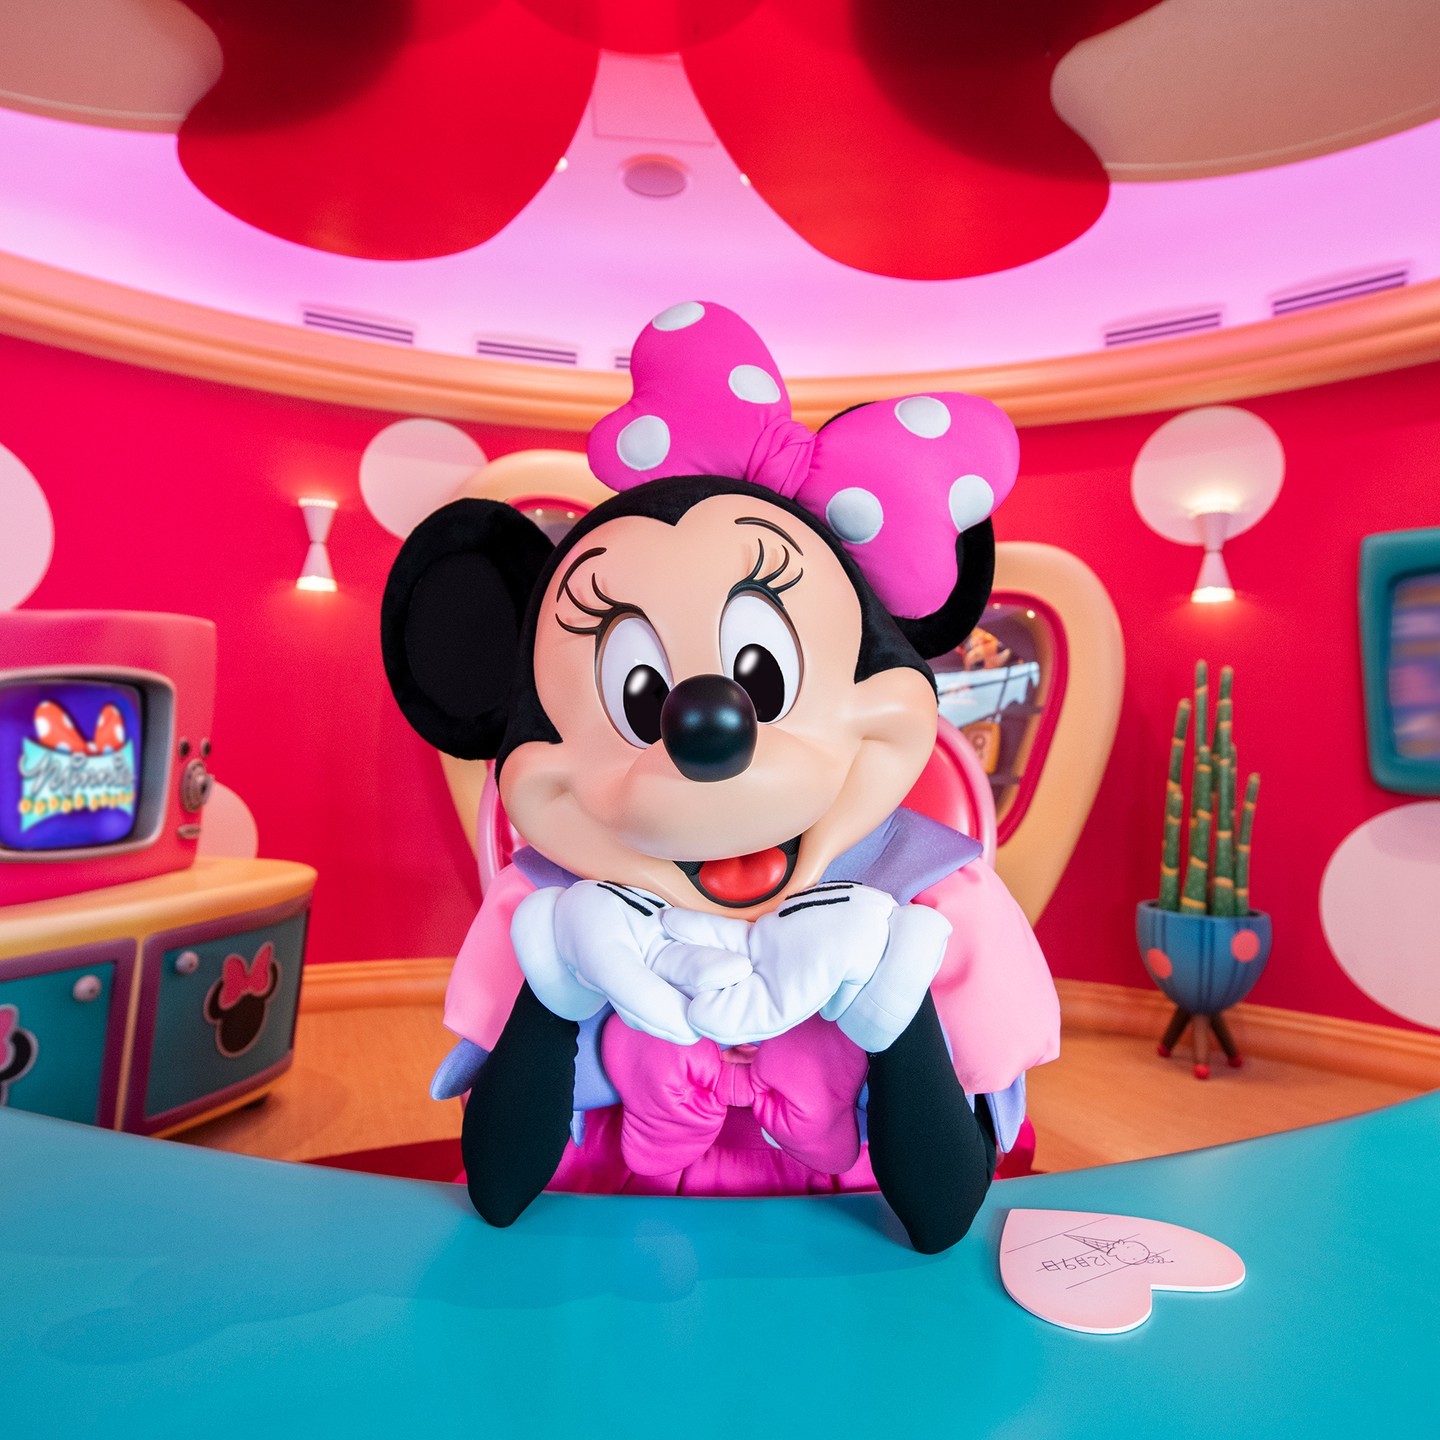 Minnie is always ready for her closeup!
そんなに見つめられると照れちゃうね❤️
#minniemouse...的圖像